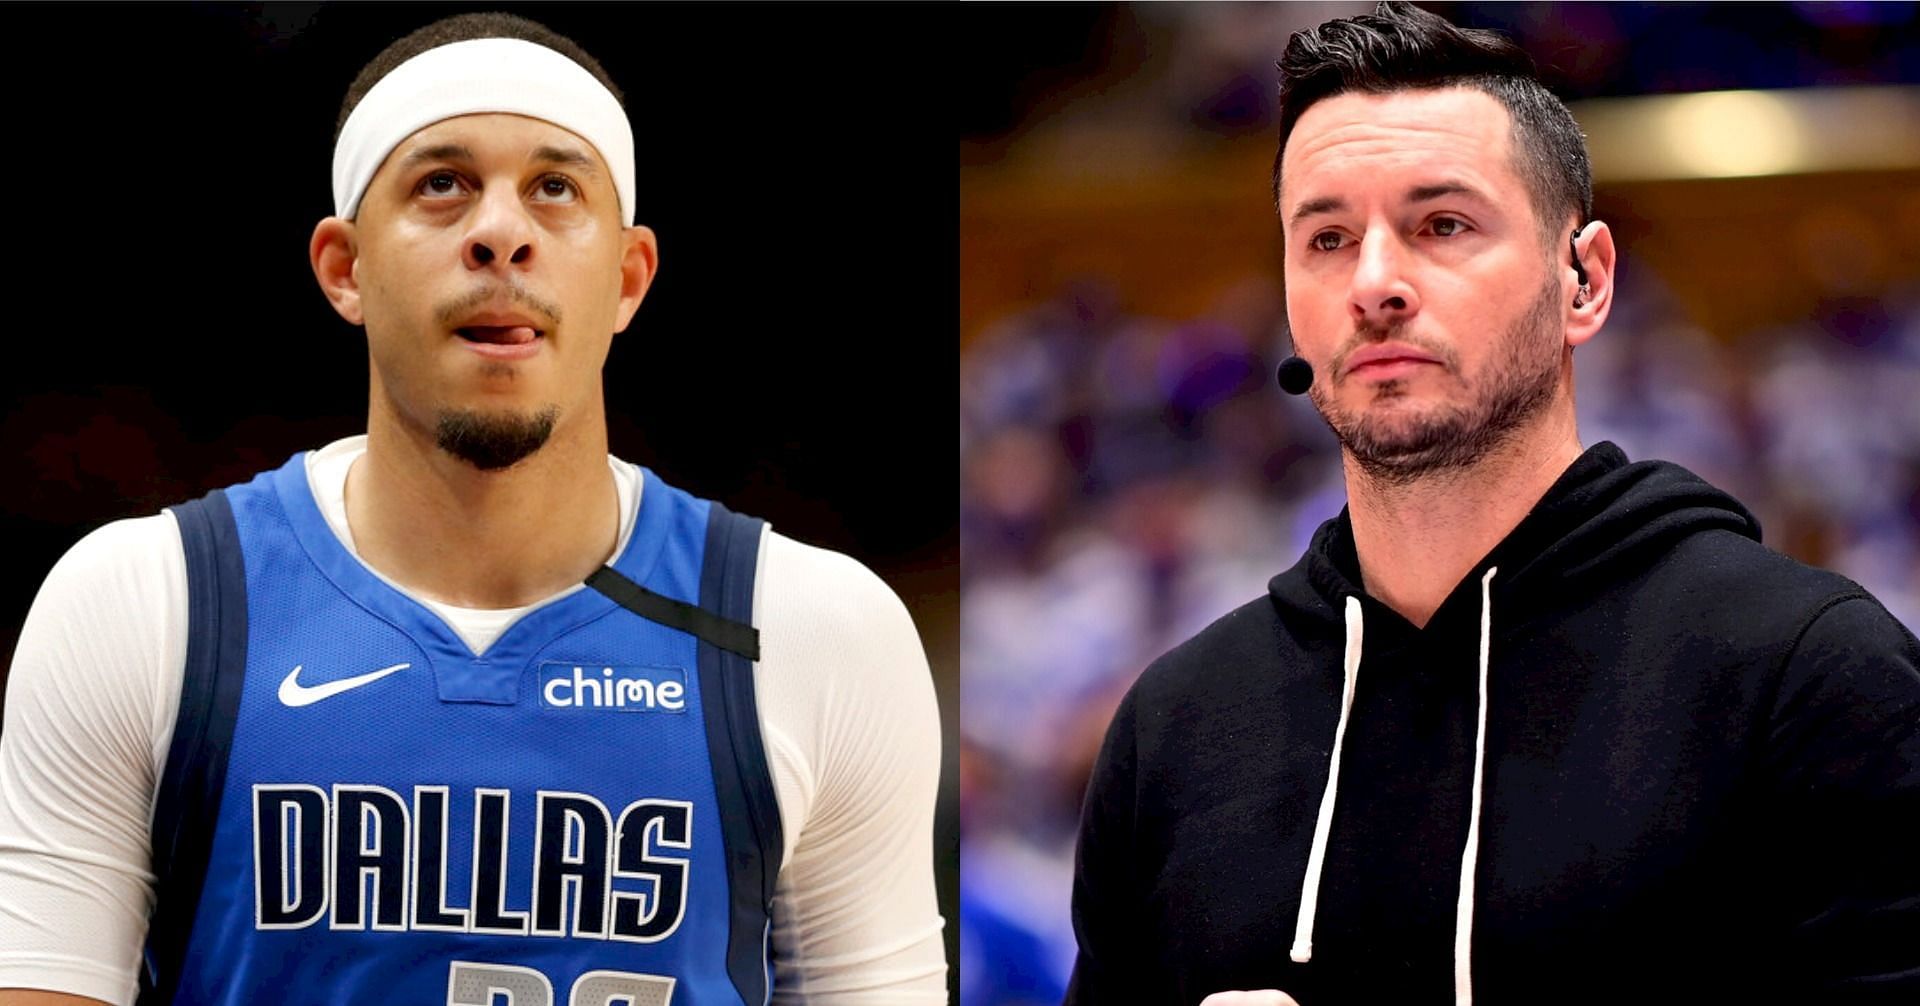 JJ Redick: A College Legend & NBA Sharpshooter Has Called it a Career